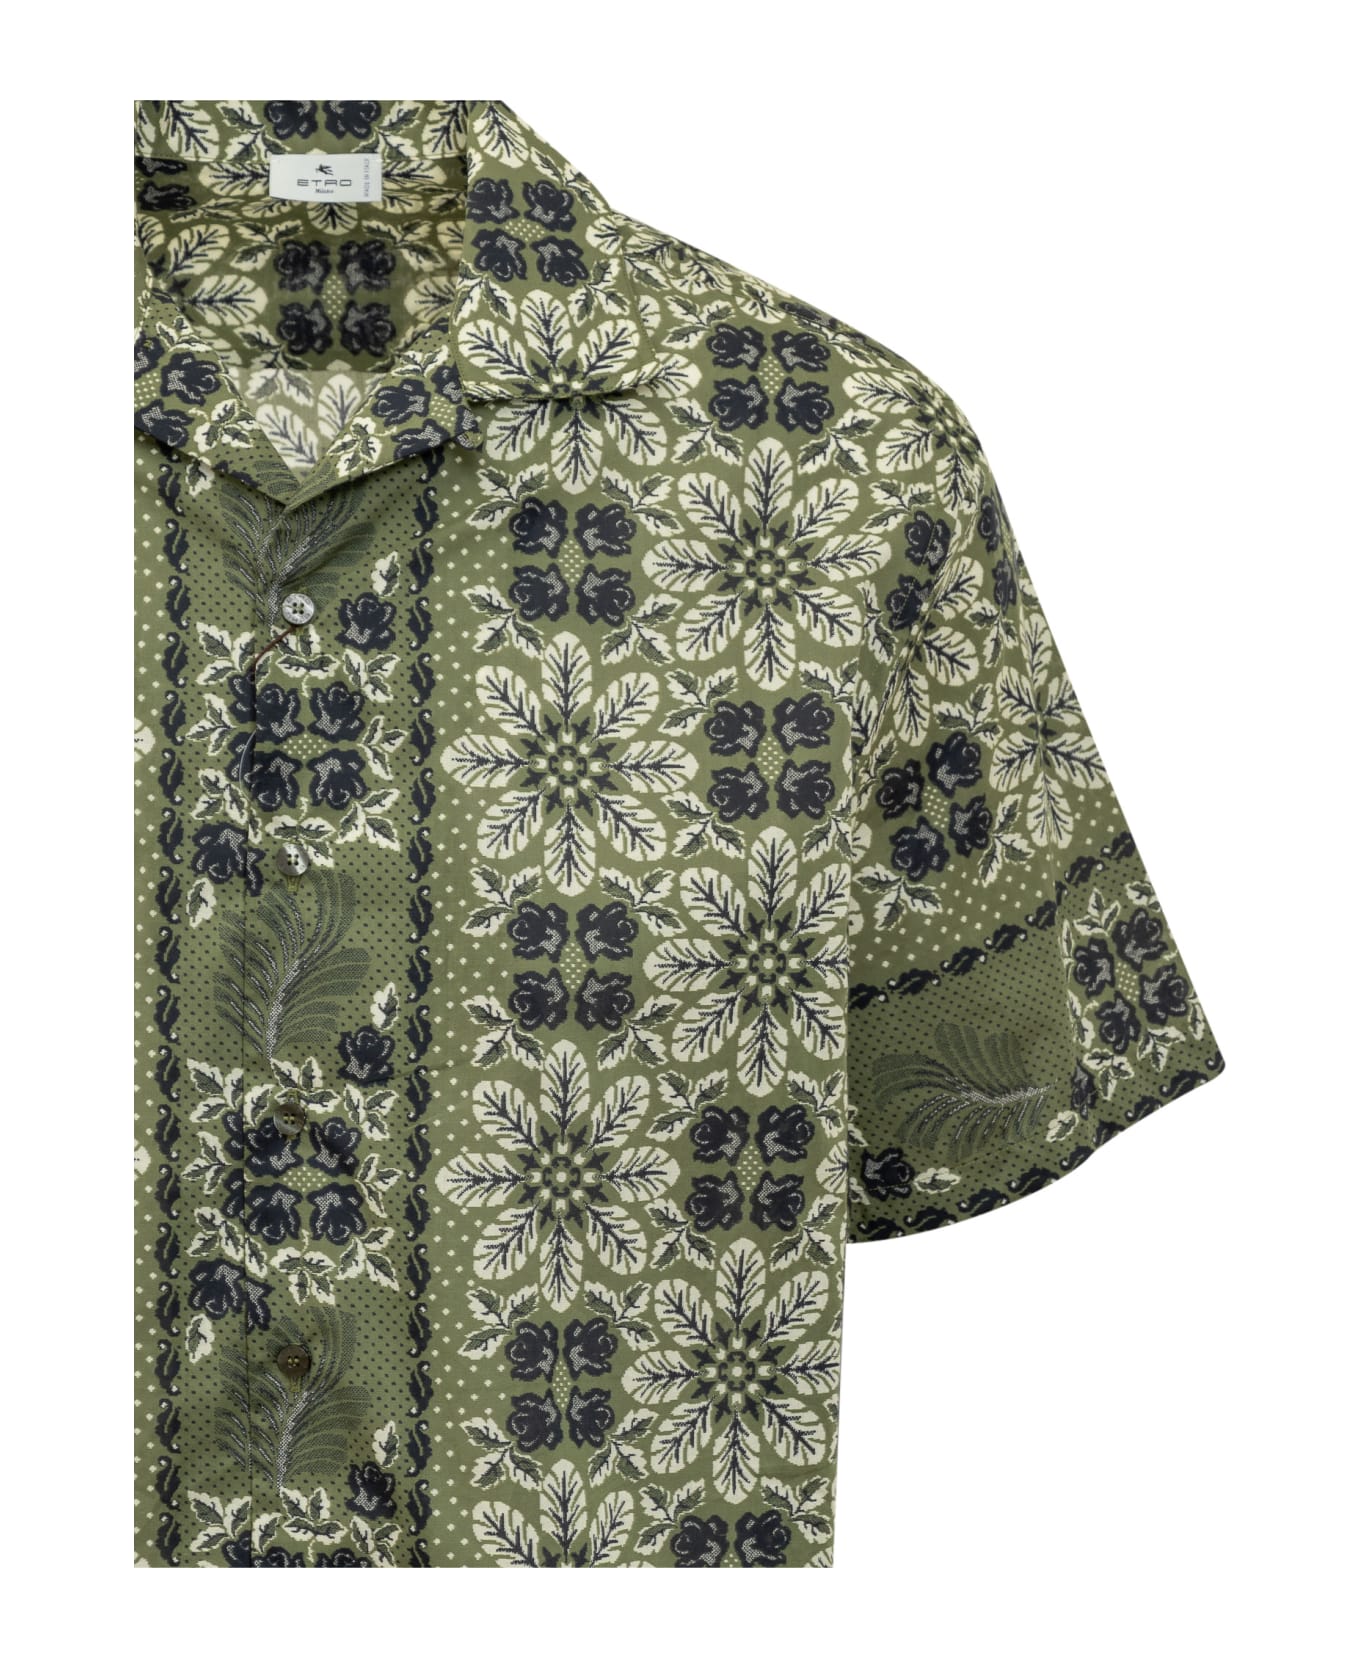 Etro Bowling Shirt With Floral Foliage Print - ST FDO VERDE シャツ